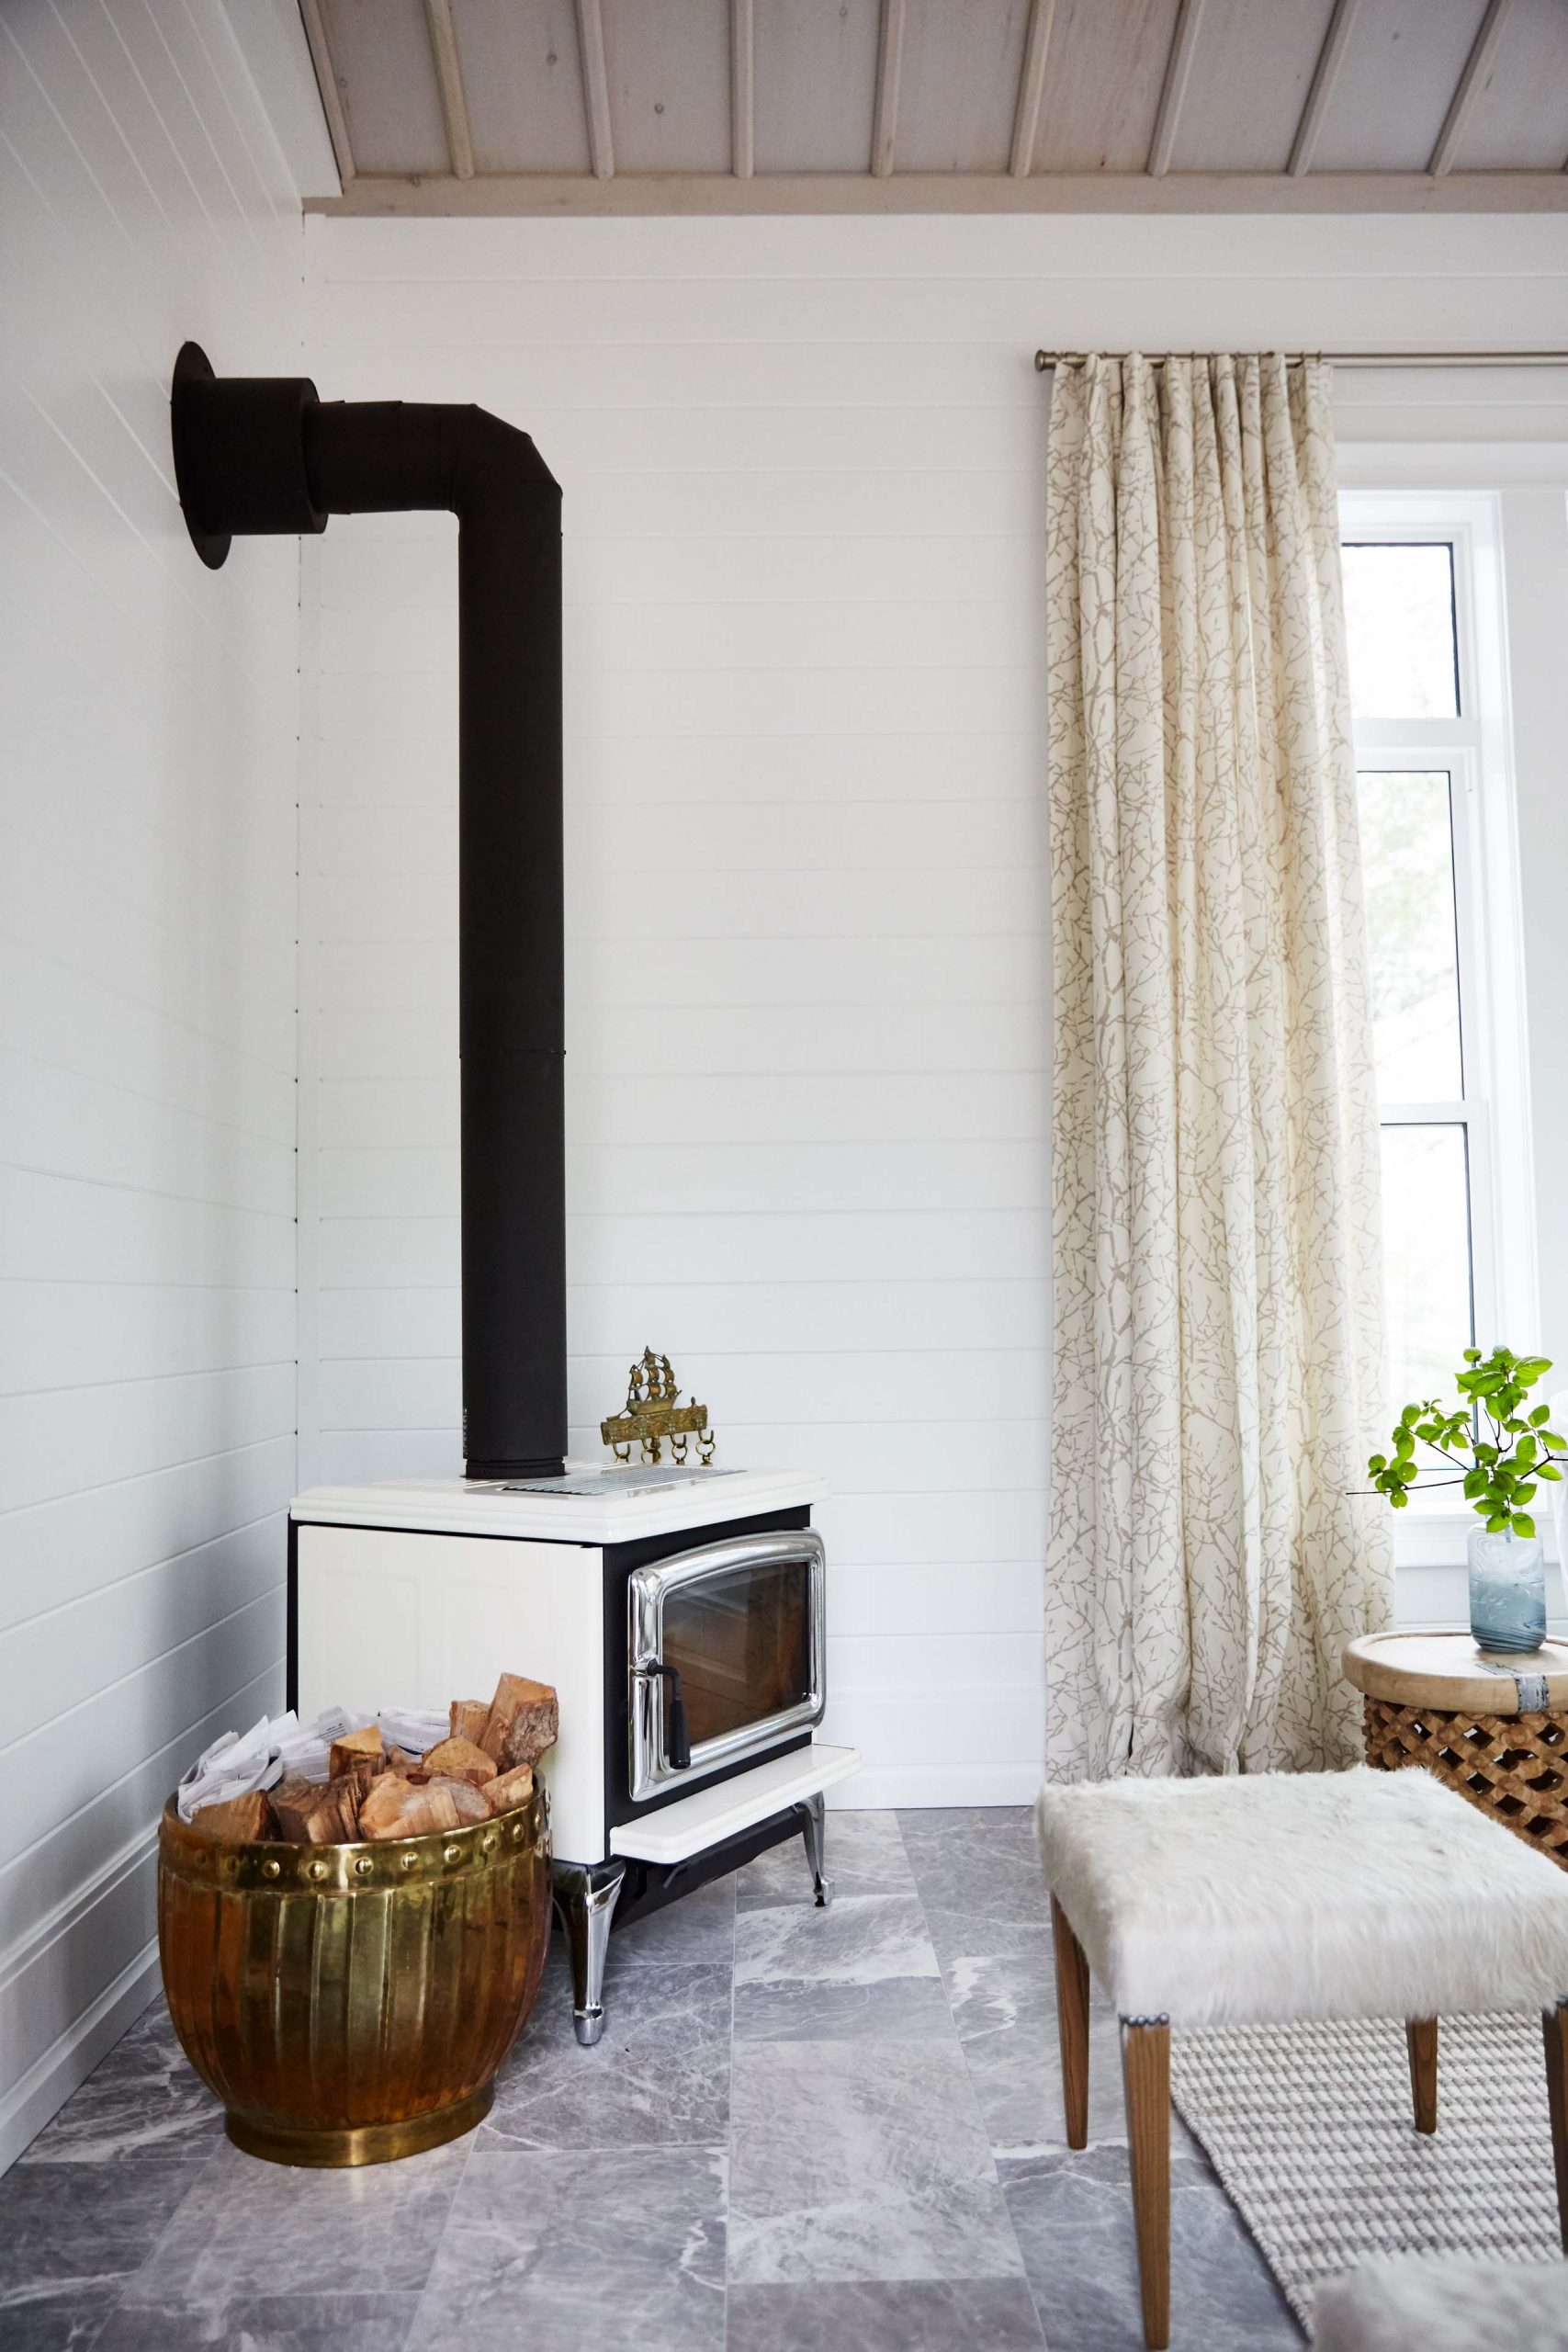 A vintage fireplace stove adds instant charm and character.